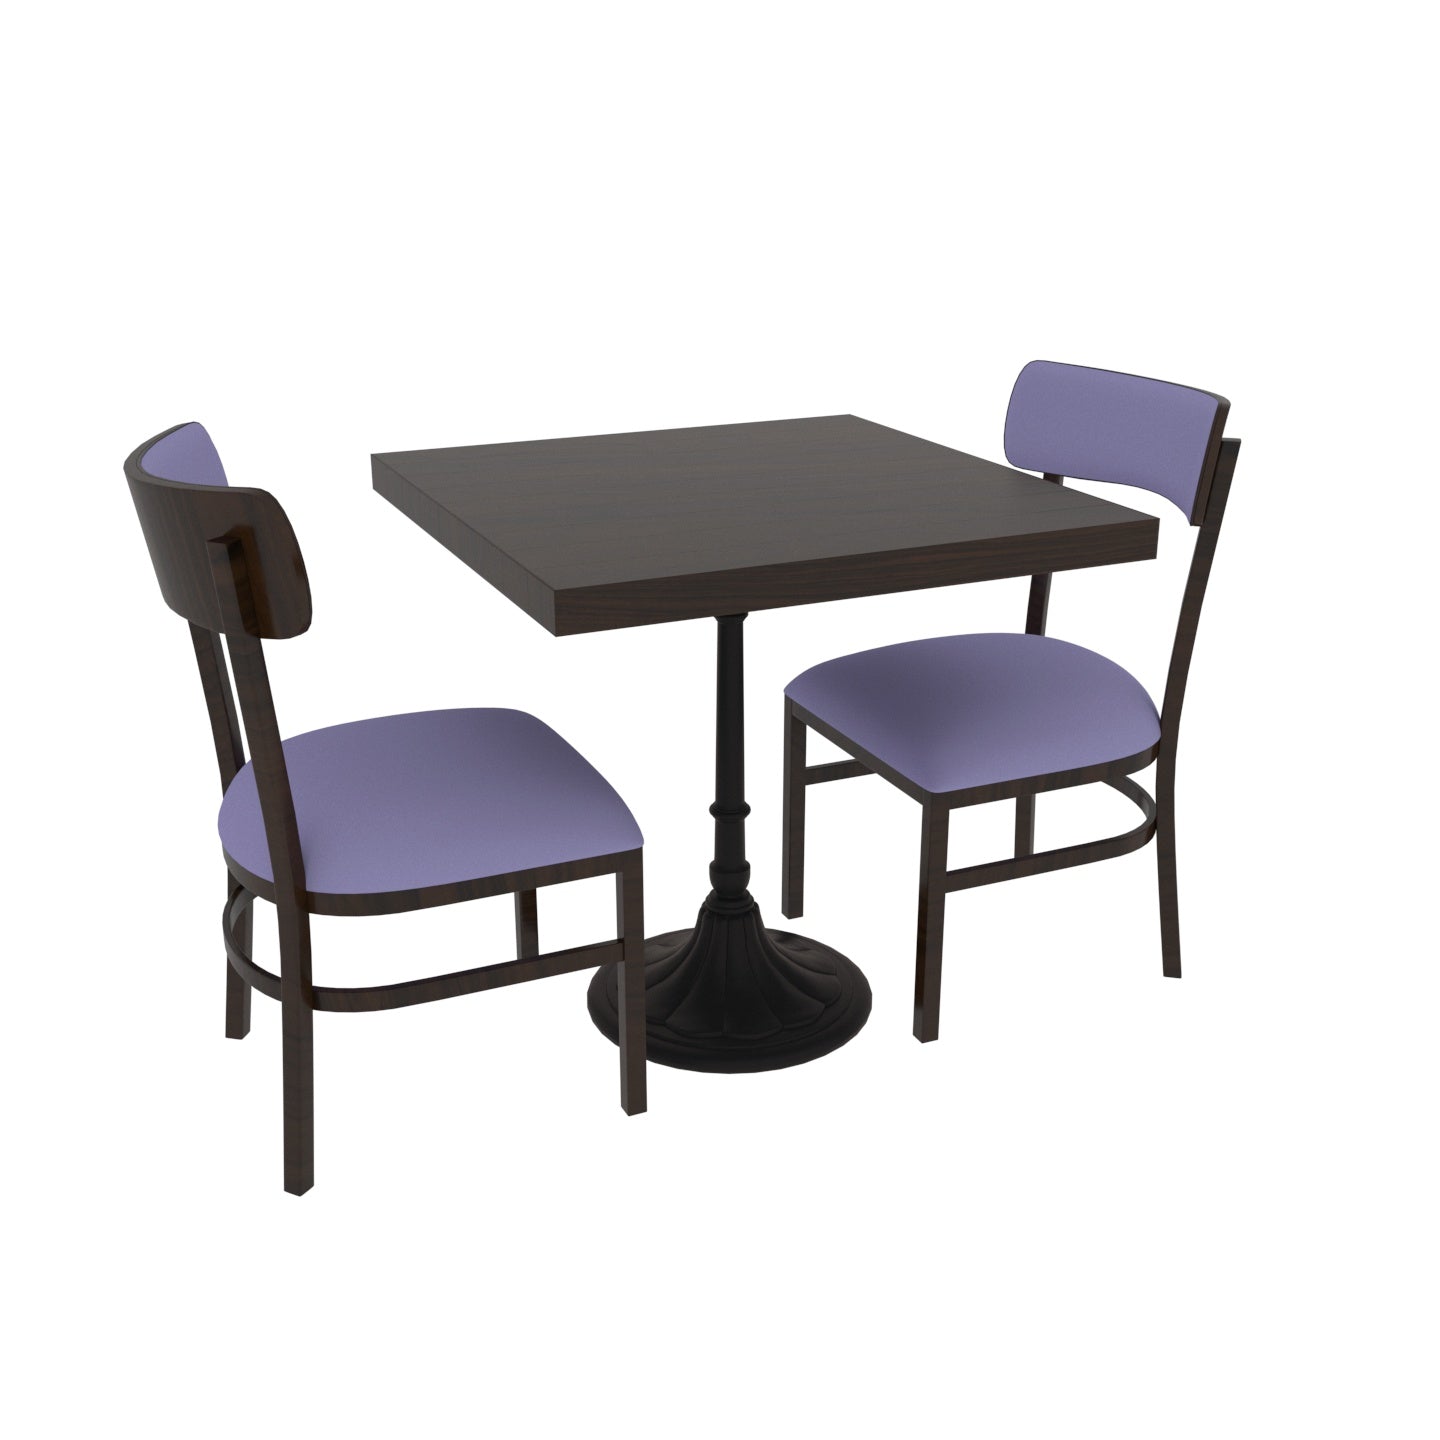 Morris Melt Simple Small Two Chair Complete Dining Set Dining Set